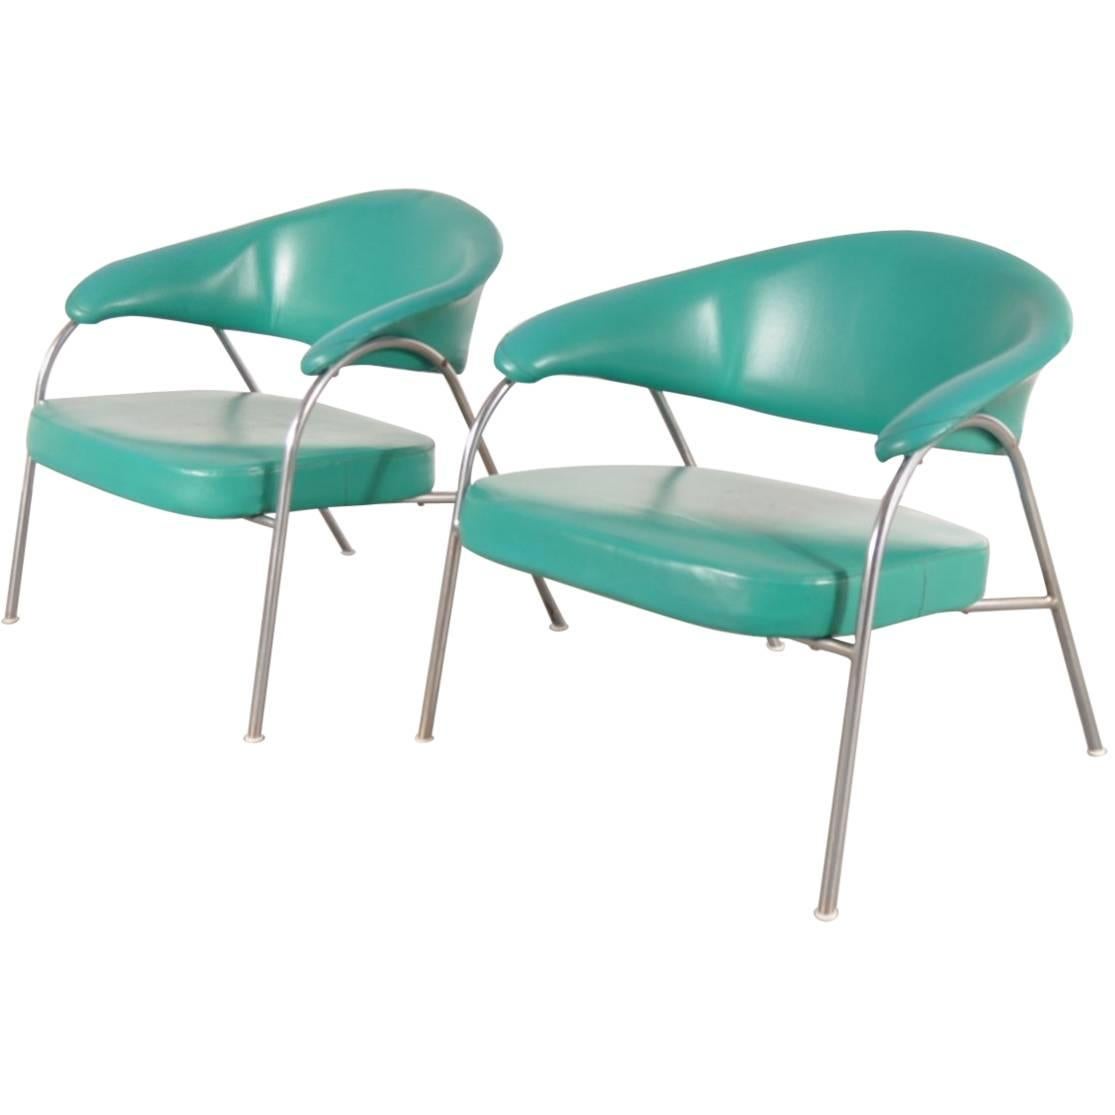 Pair of Rare Easy Chairs Produced by Arflex, Italy, circa 1960